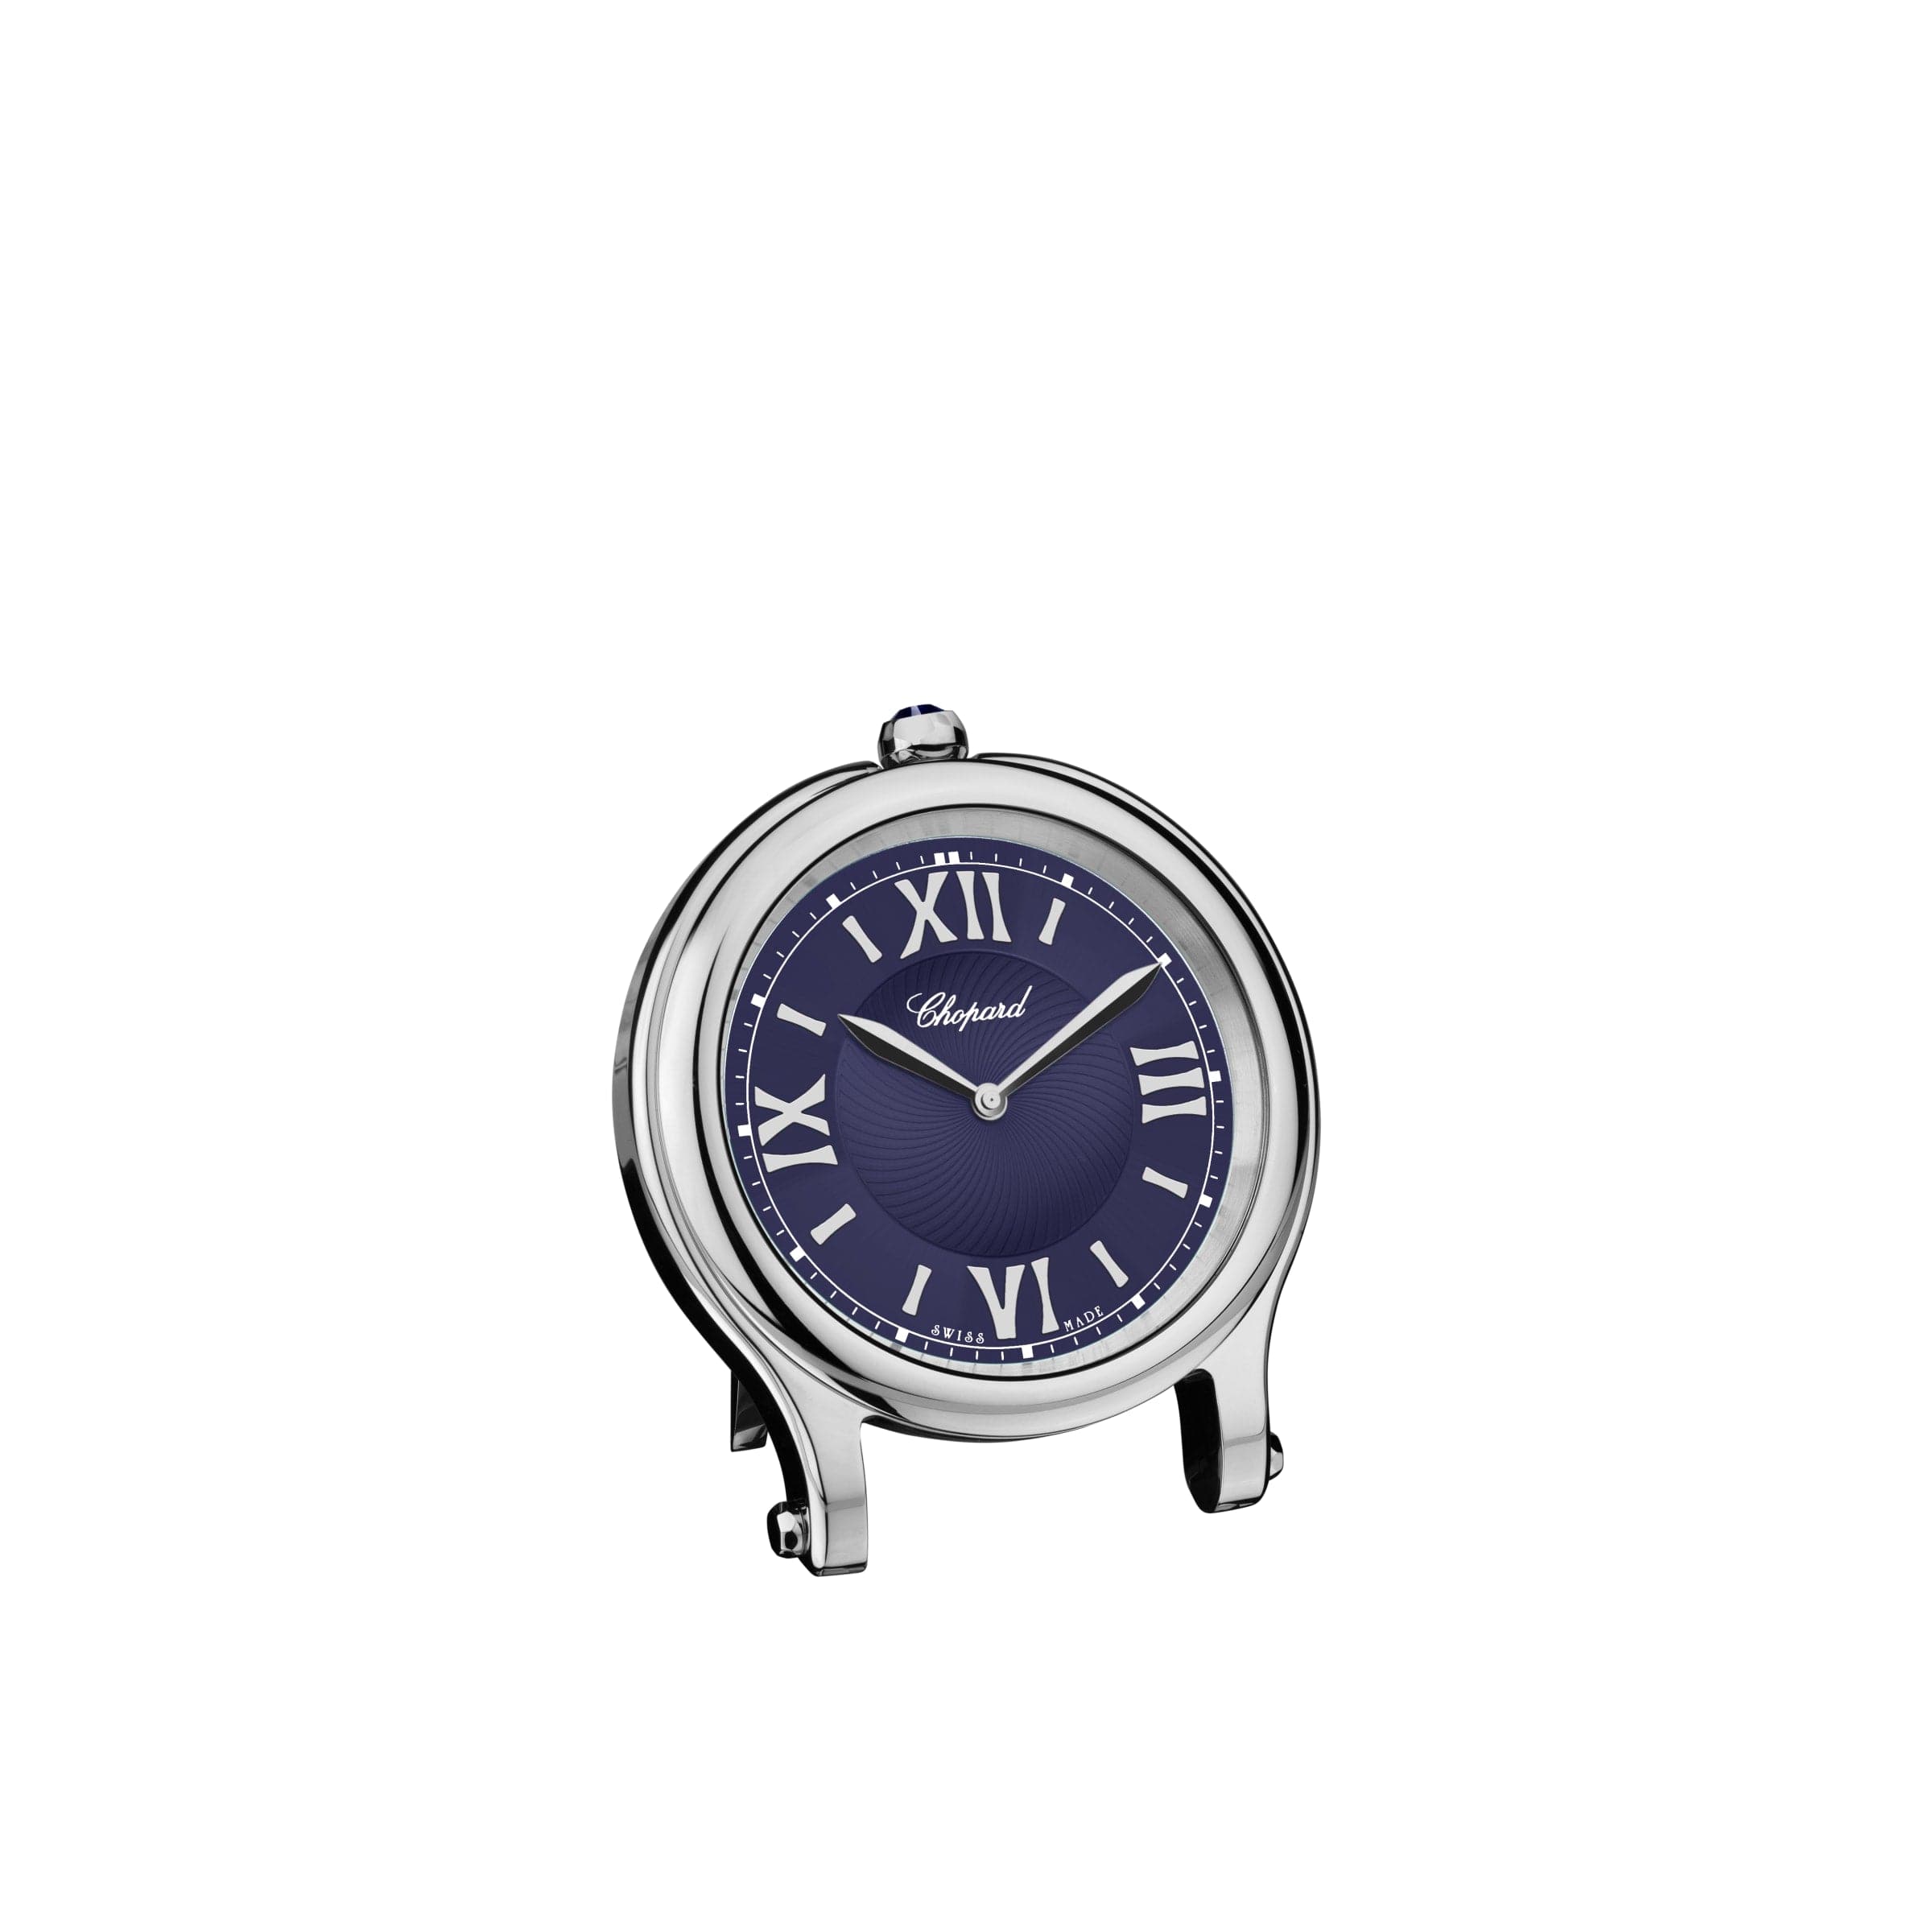 HAPPY SPORT TABLE CLOCK STAINLESS STEEL - Kamal Watch Company